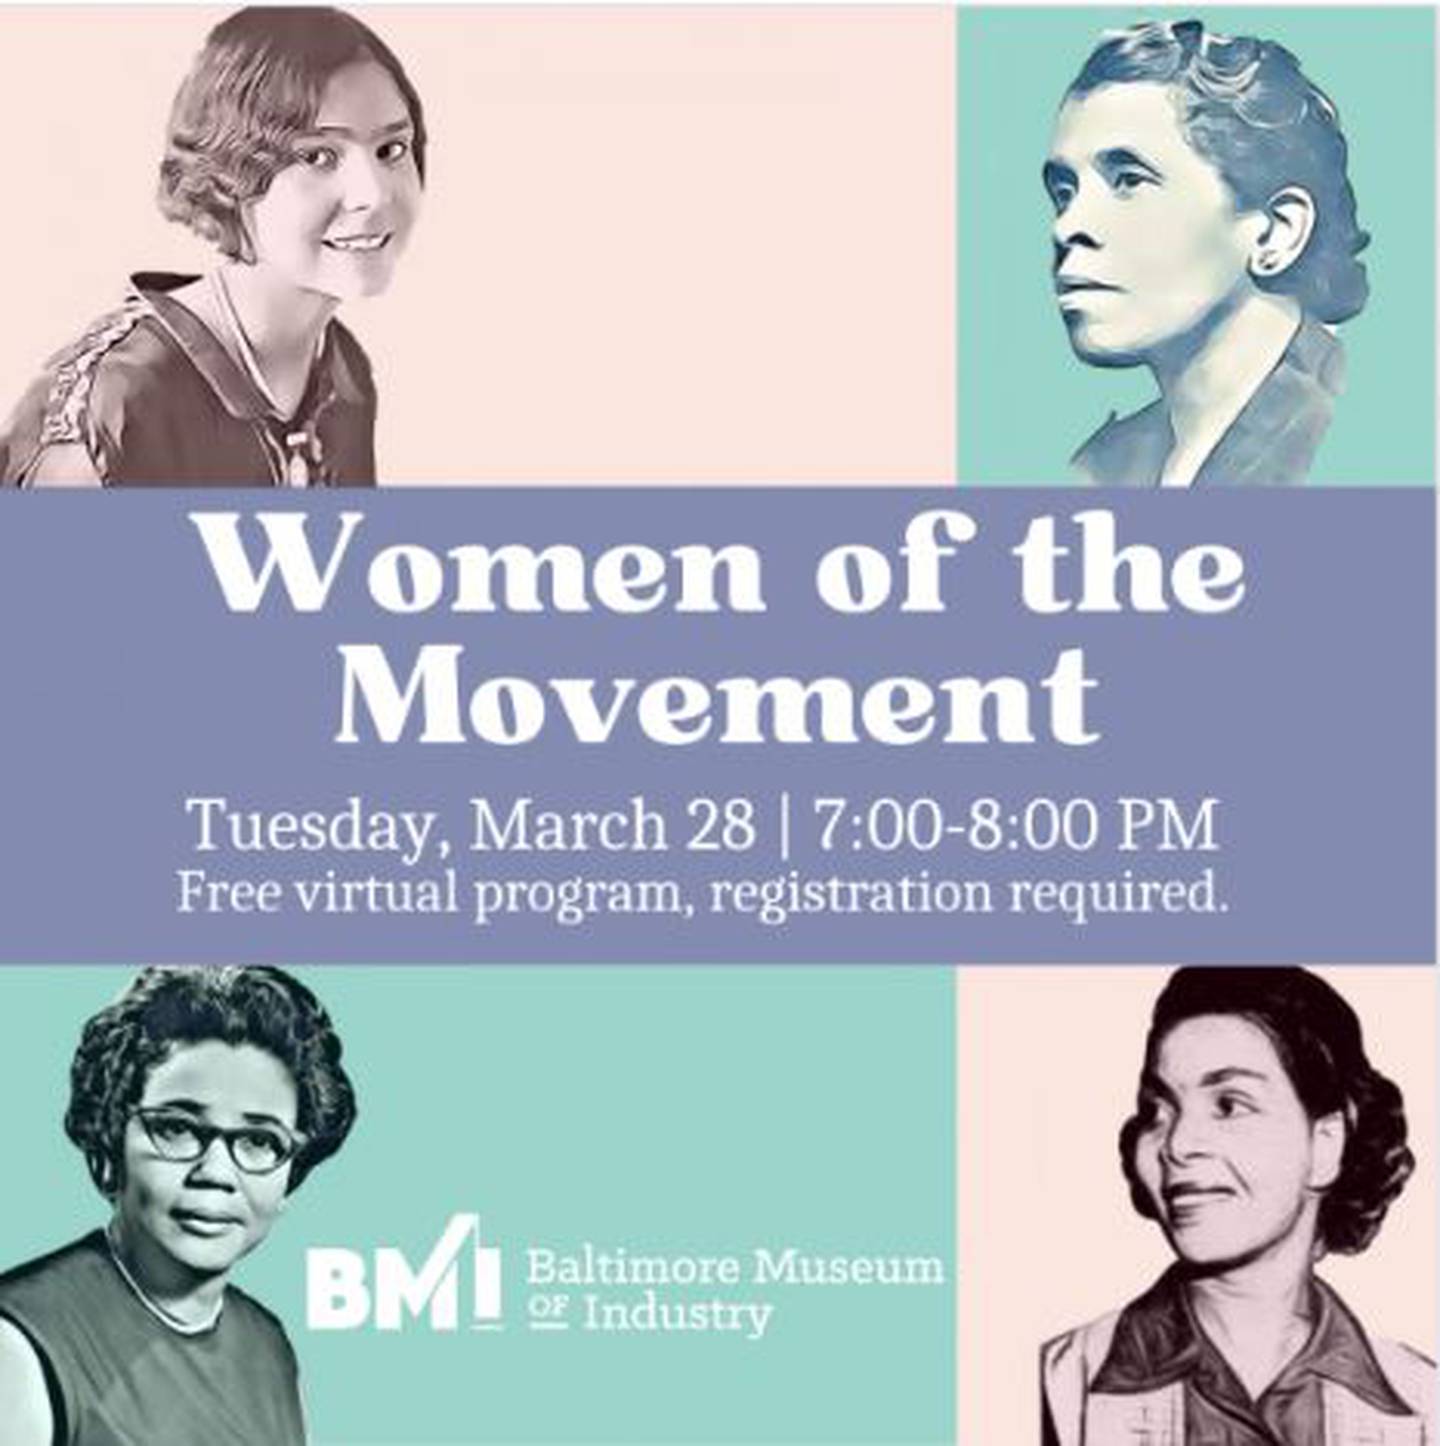 The Baltimore Museum of Industry is offering Women of the Movement, a free virtual program, on March 28, 2023.